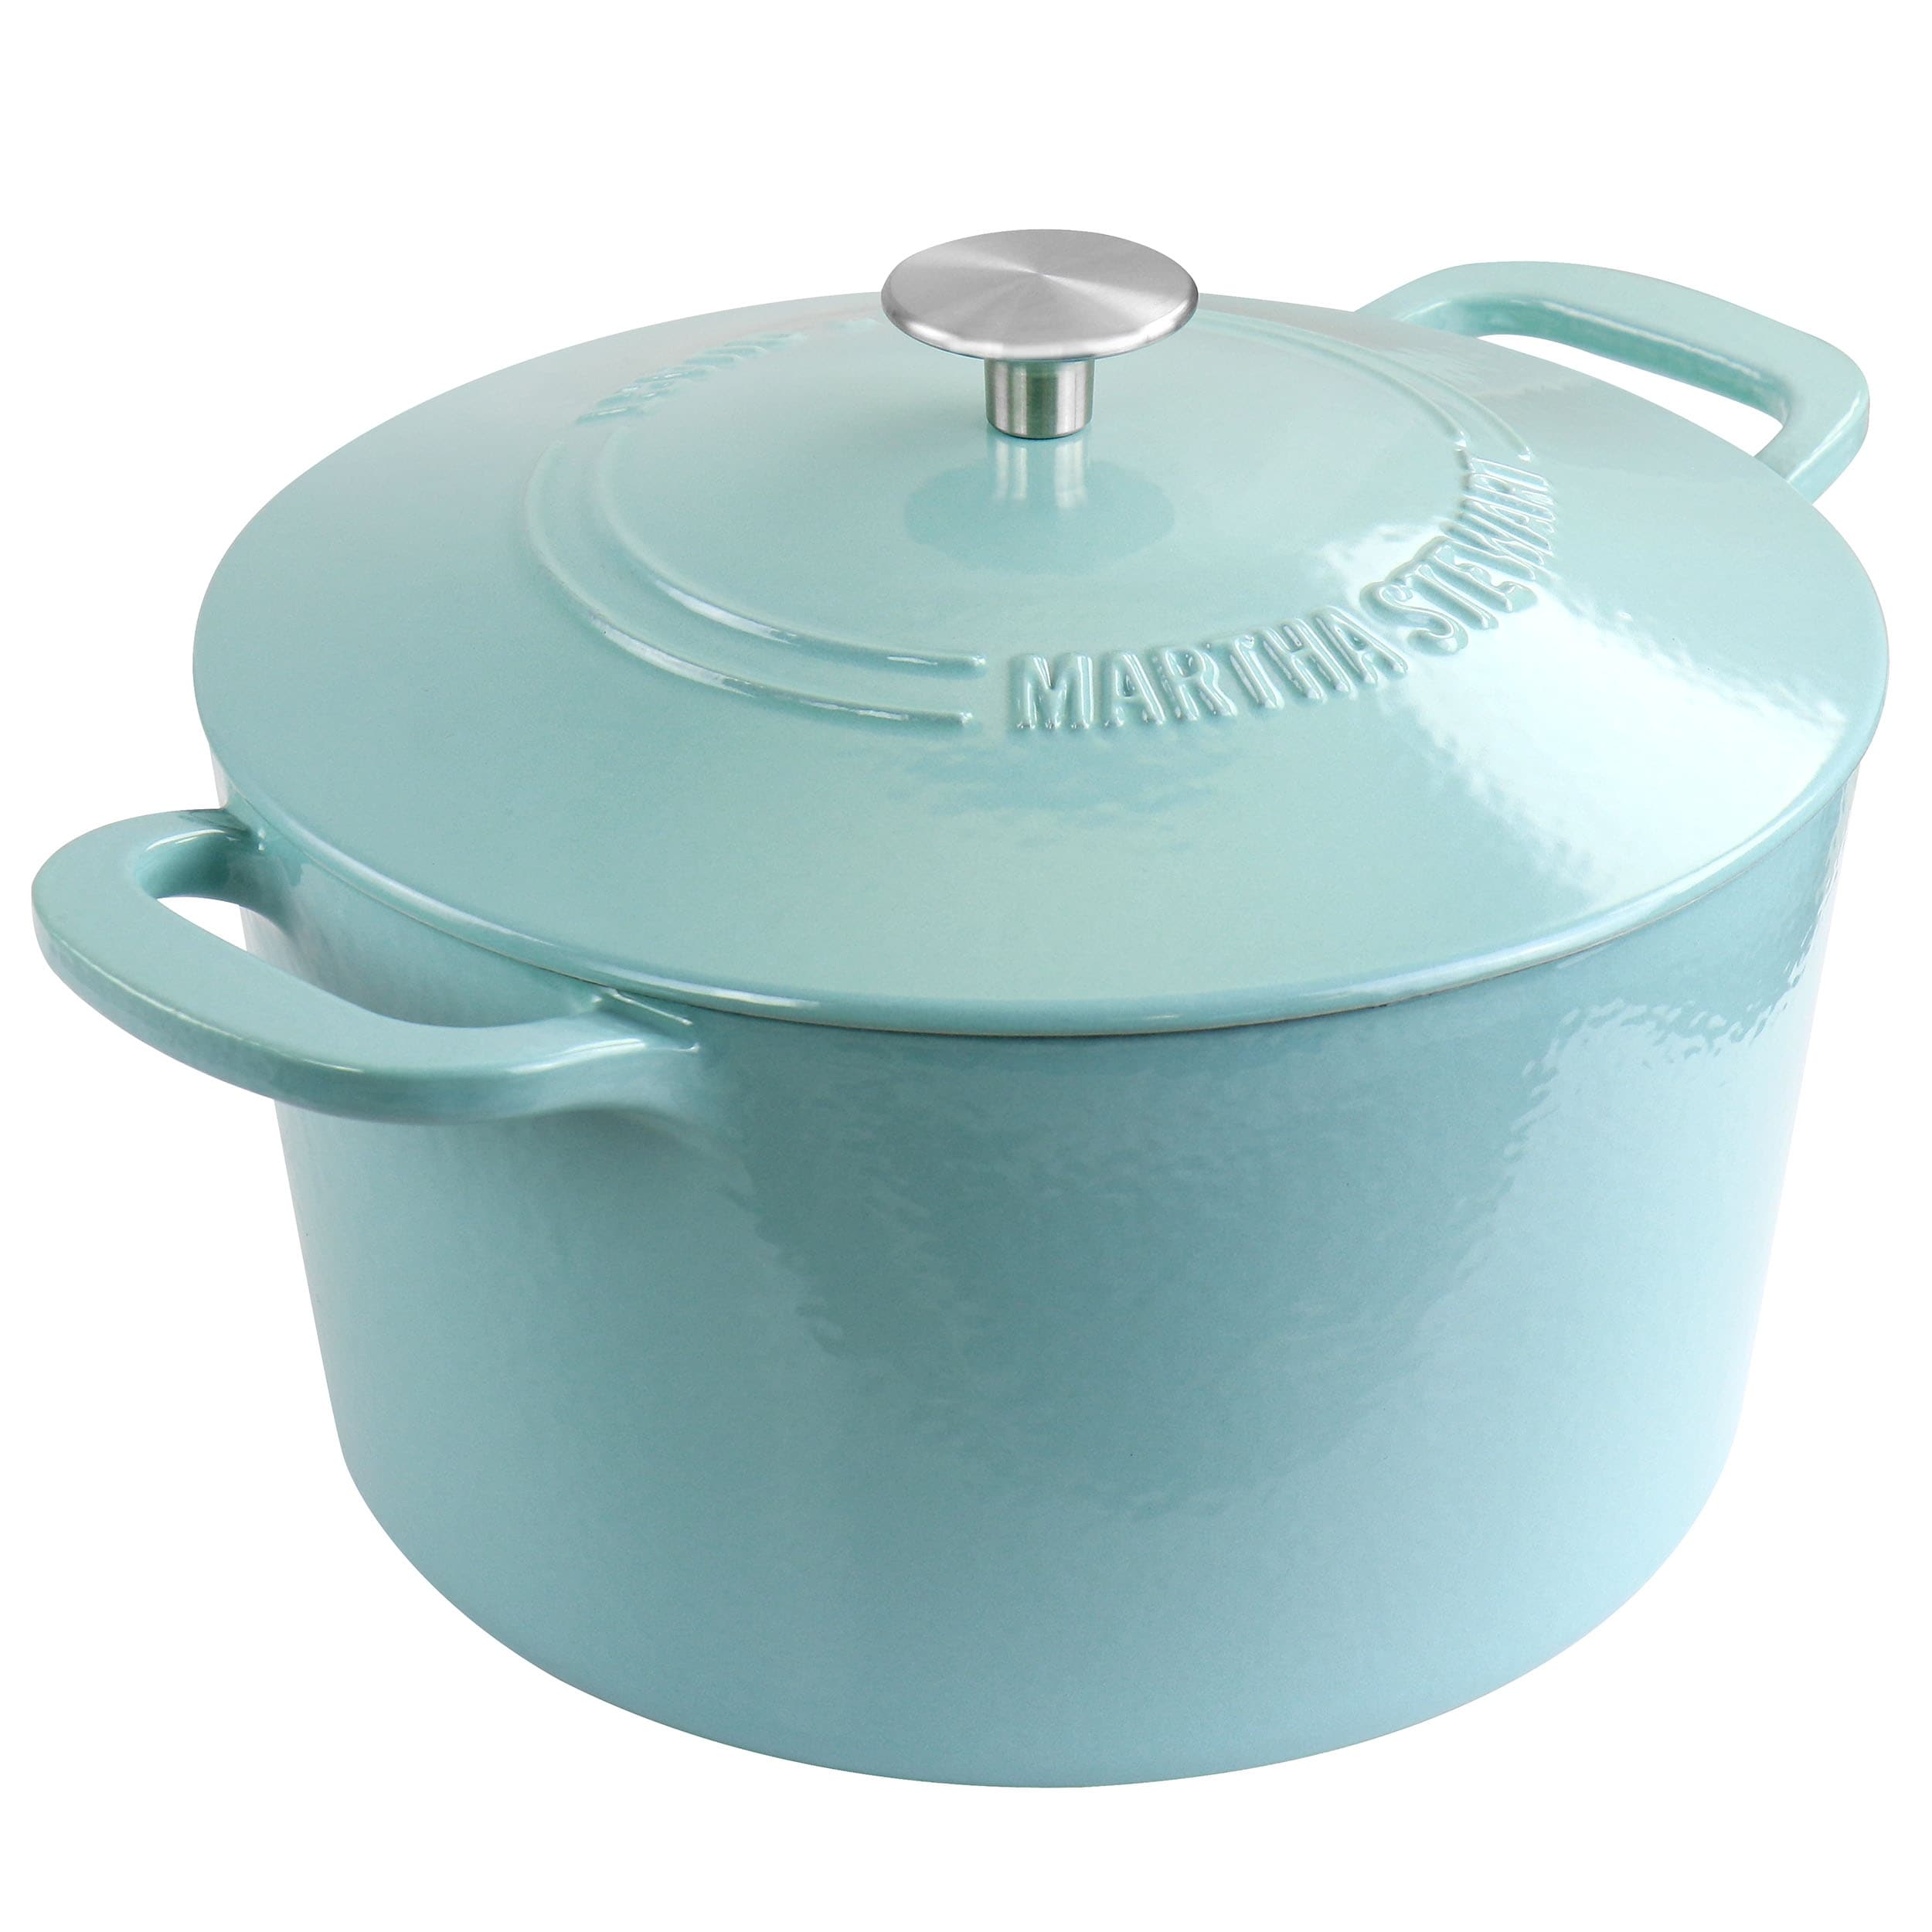 https://ak1.ostkcdn.com/images/products/is/images/direct/7703f5ebee1eb0d63c178ec24a0247ee800afec4/Martha-Stewart-Enameled-Cast-Iron-7-Quart-Dutch-Oven-with-Lid.jpg